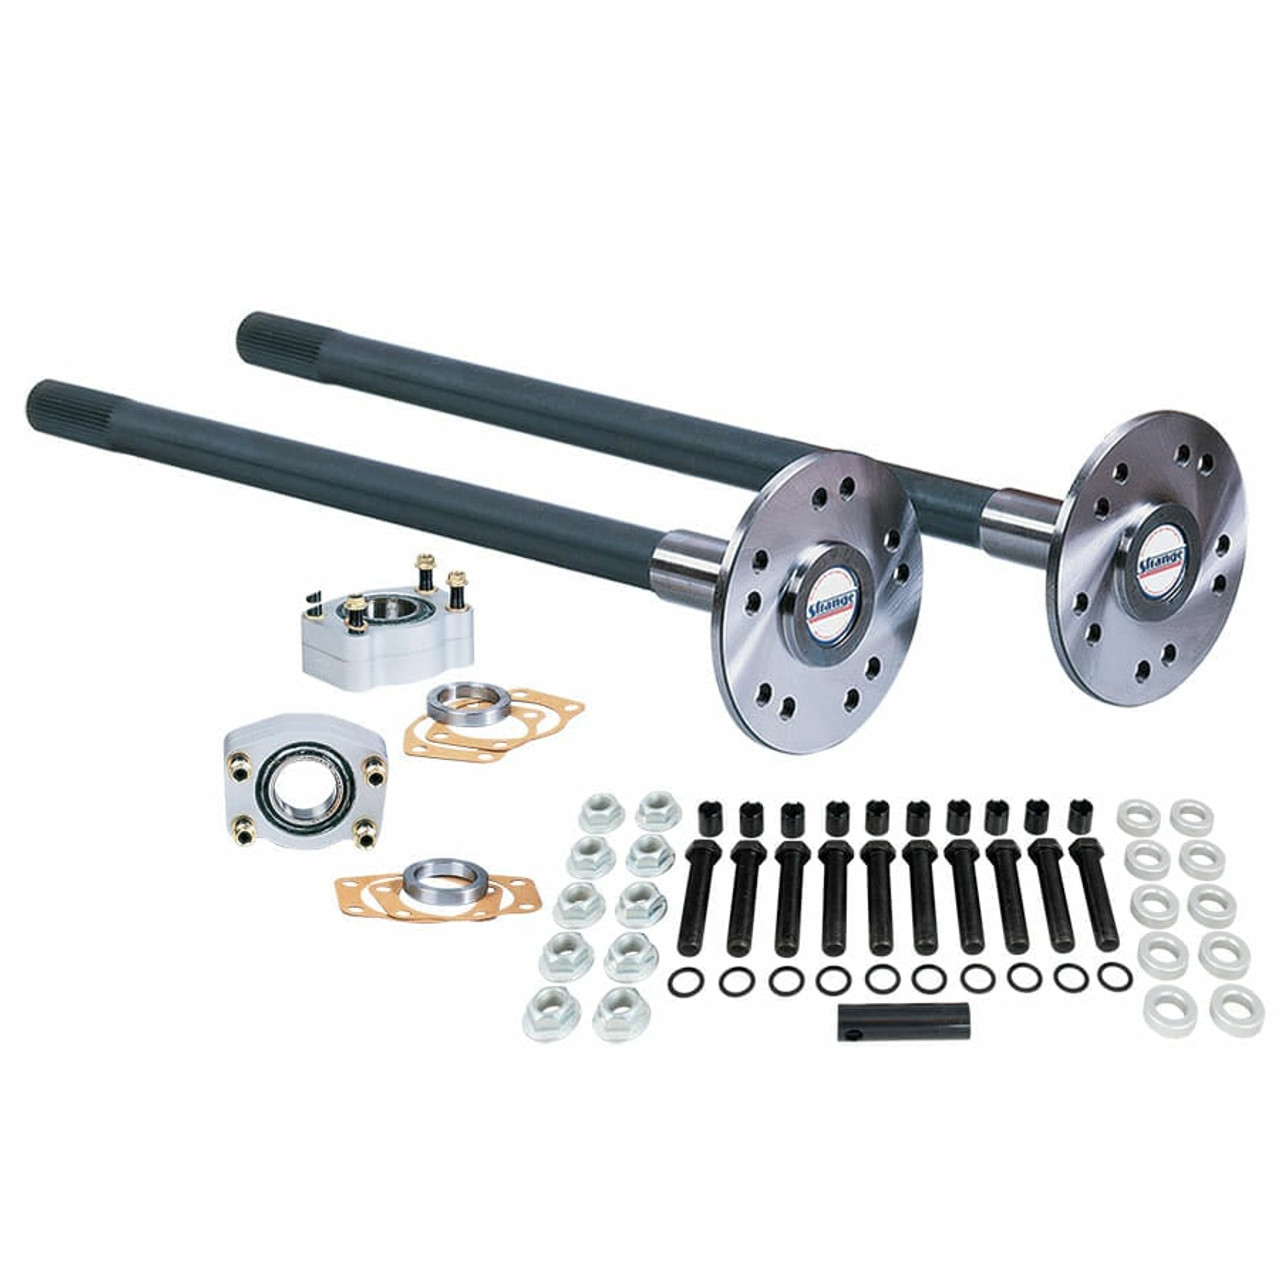 86-93 Mustang 8.8 Pro Race Axle Package With C-Clip Eliminator kit & 5/8" Stud Kit